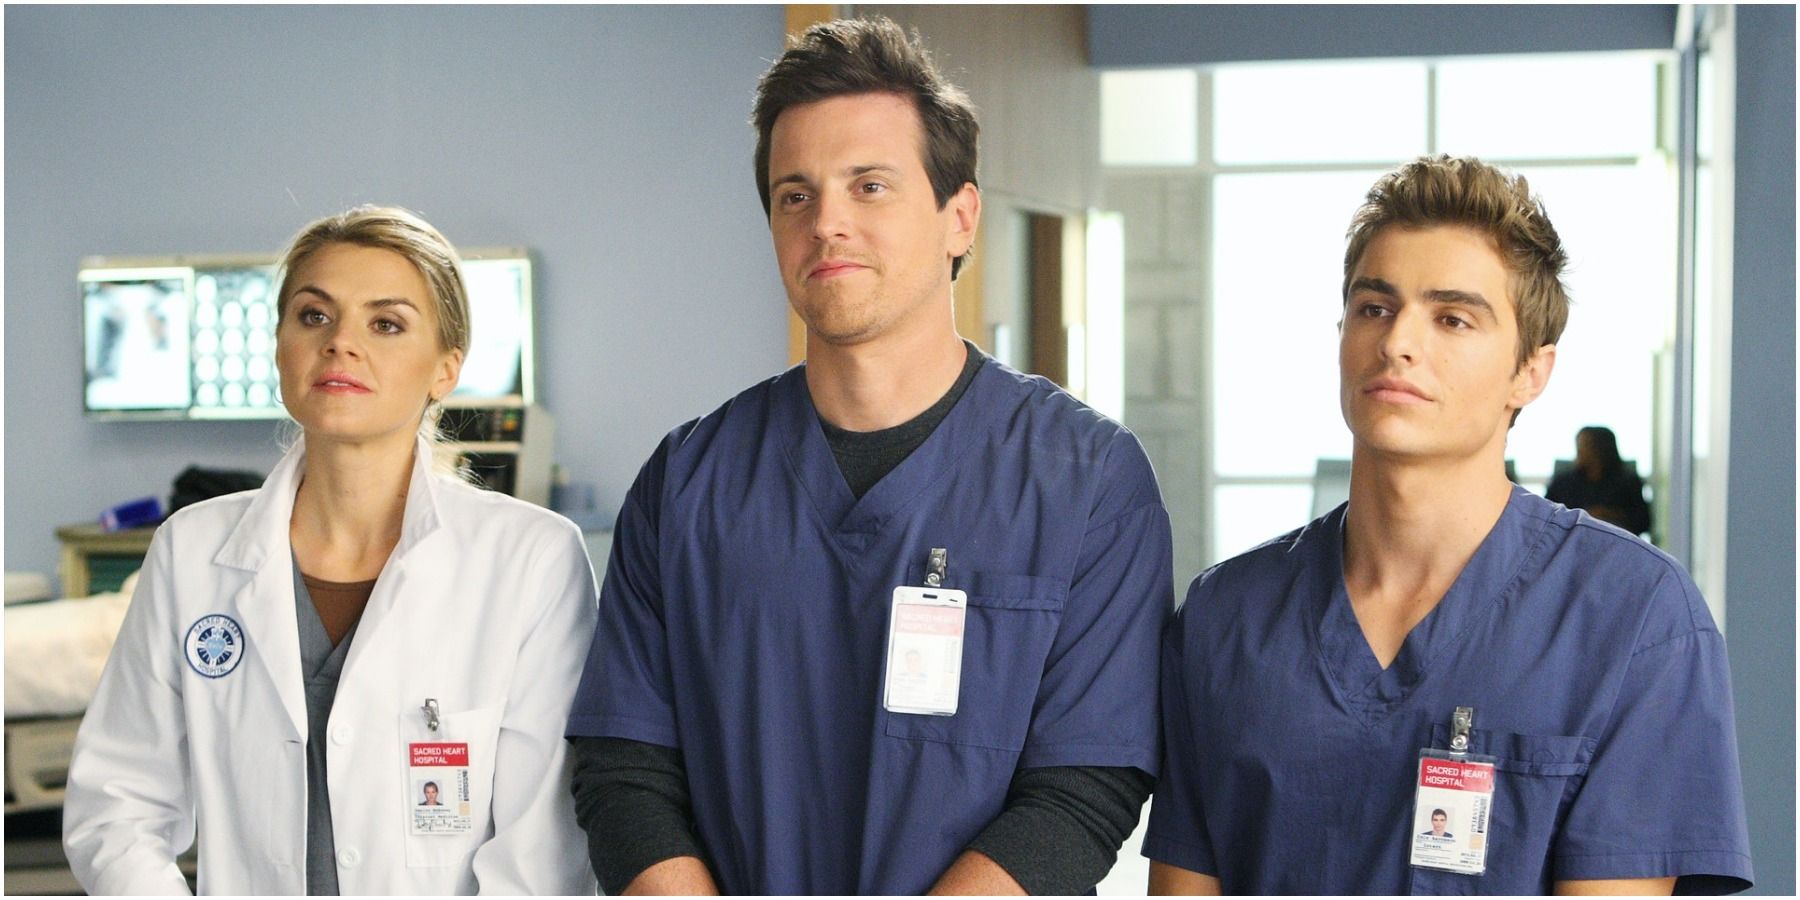 The New Scrubs Characters Introduced In Season 9